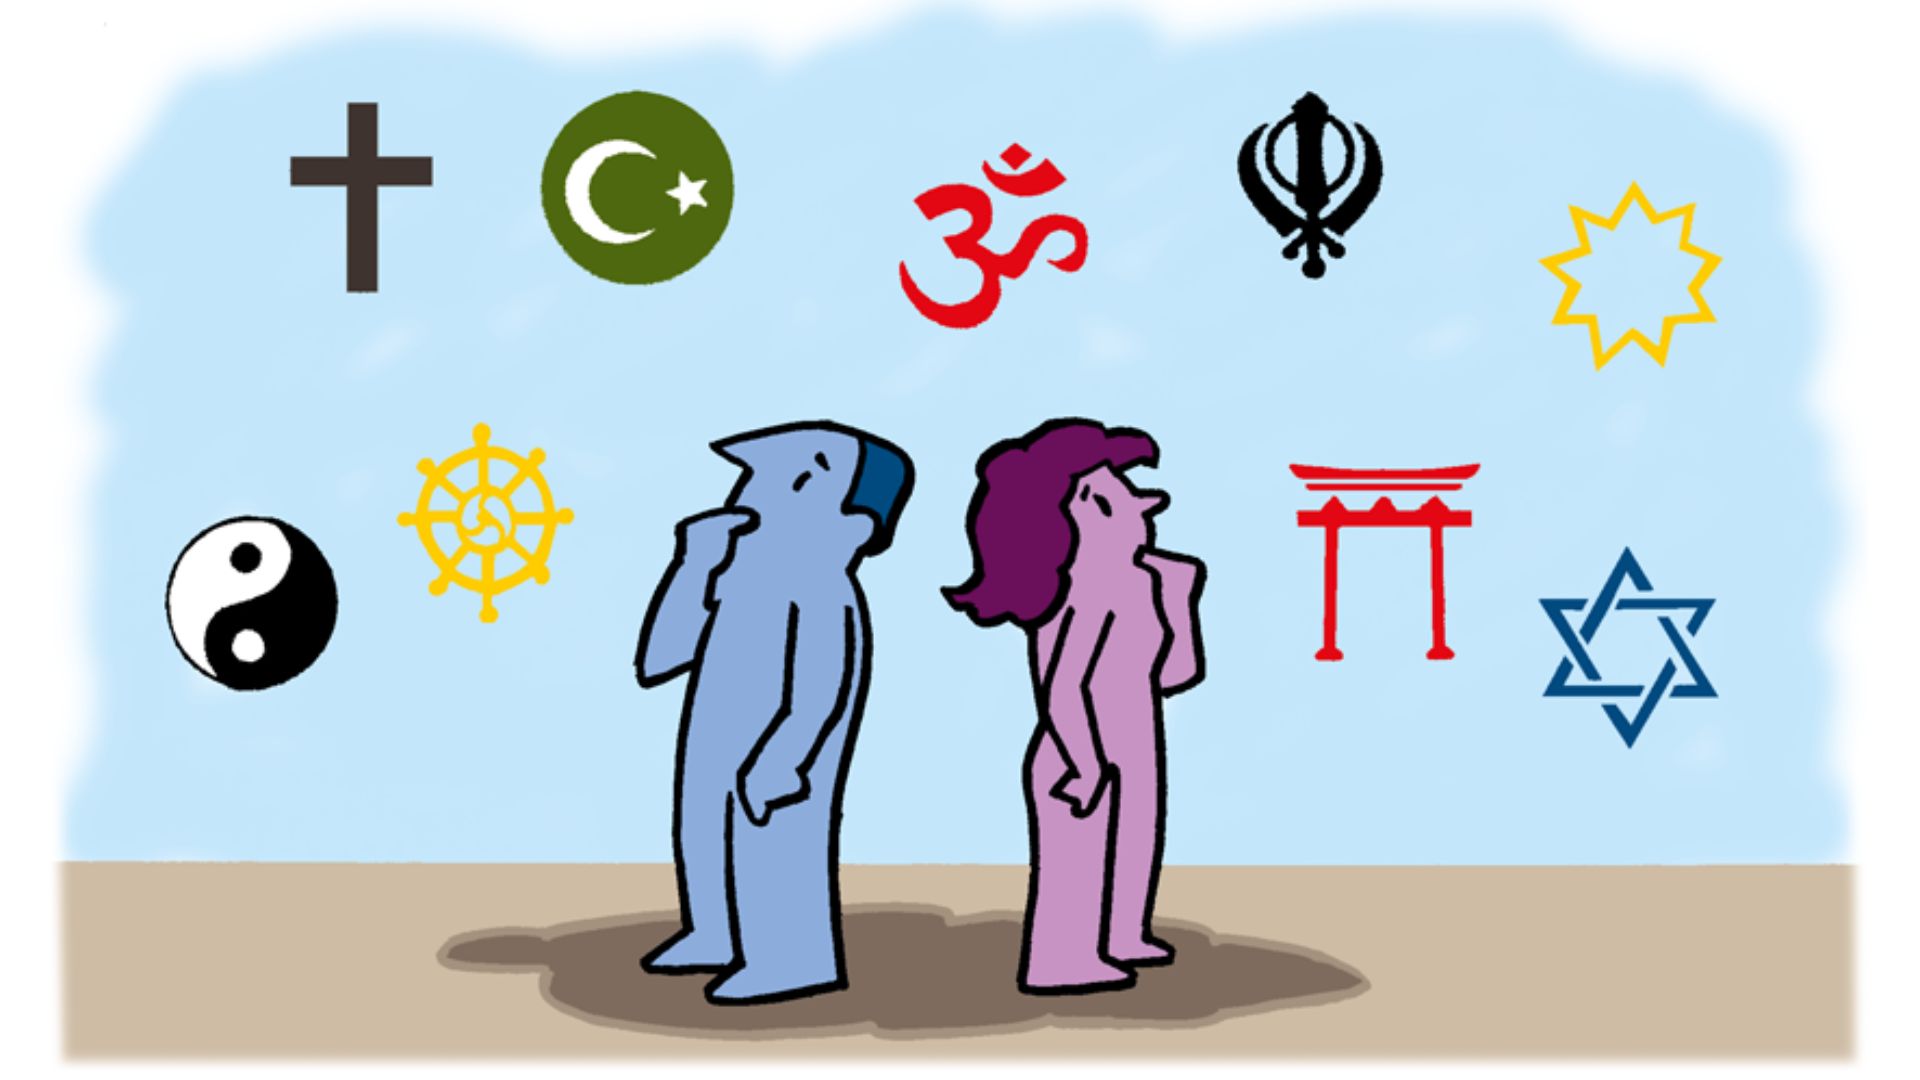 two images of people standing and signs of different religions